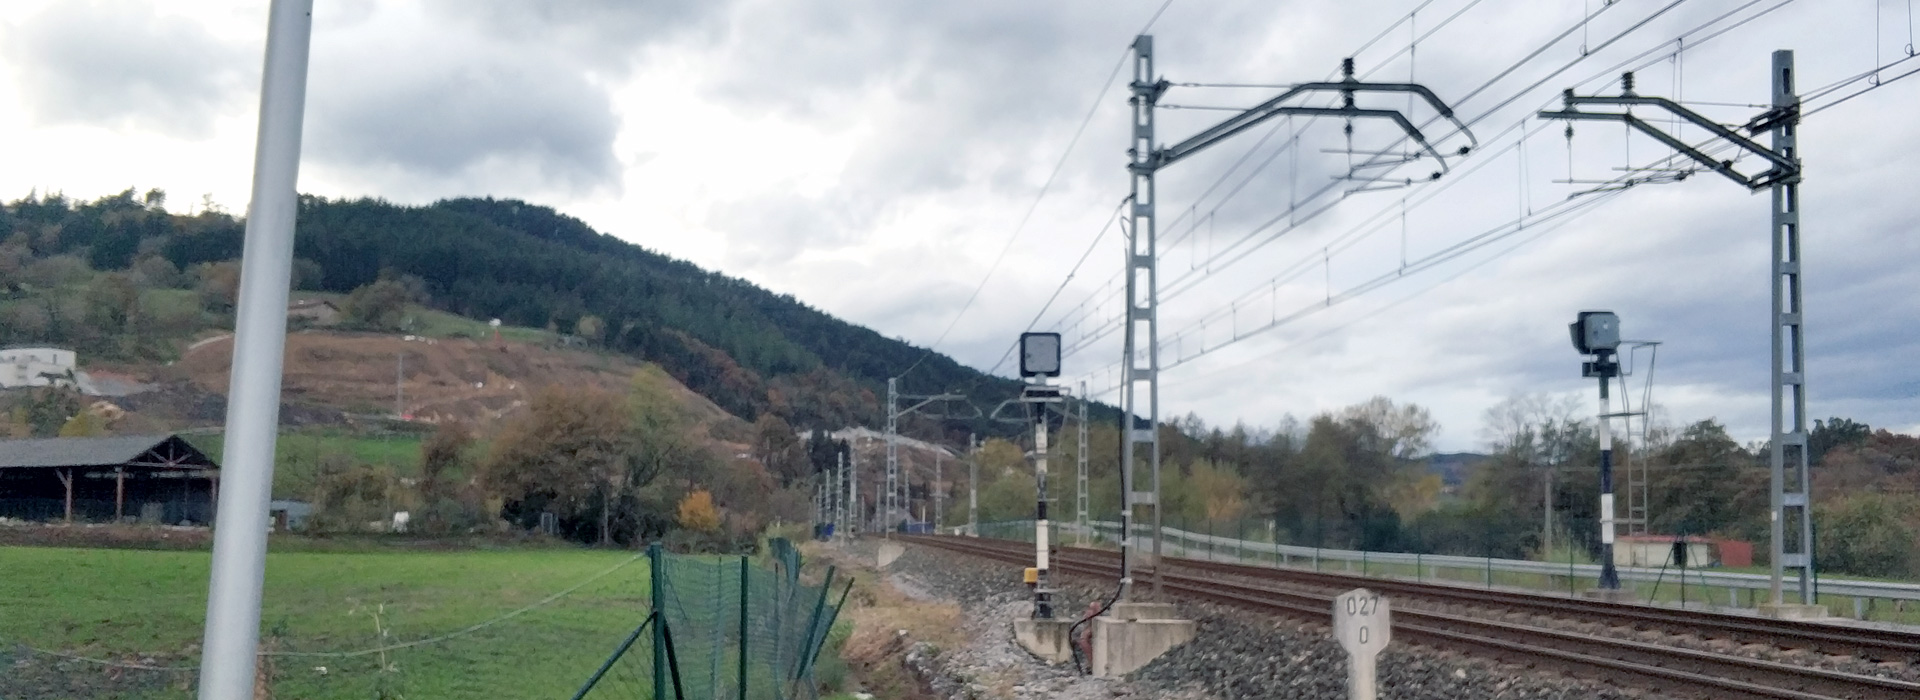 SUPPRESSION OF LEVEL CROSSINGS IN THE BASQUE COUNTRY NETWORK - 2